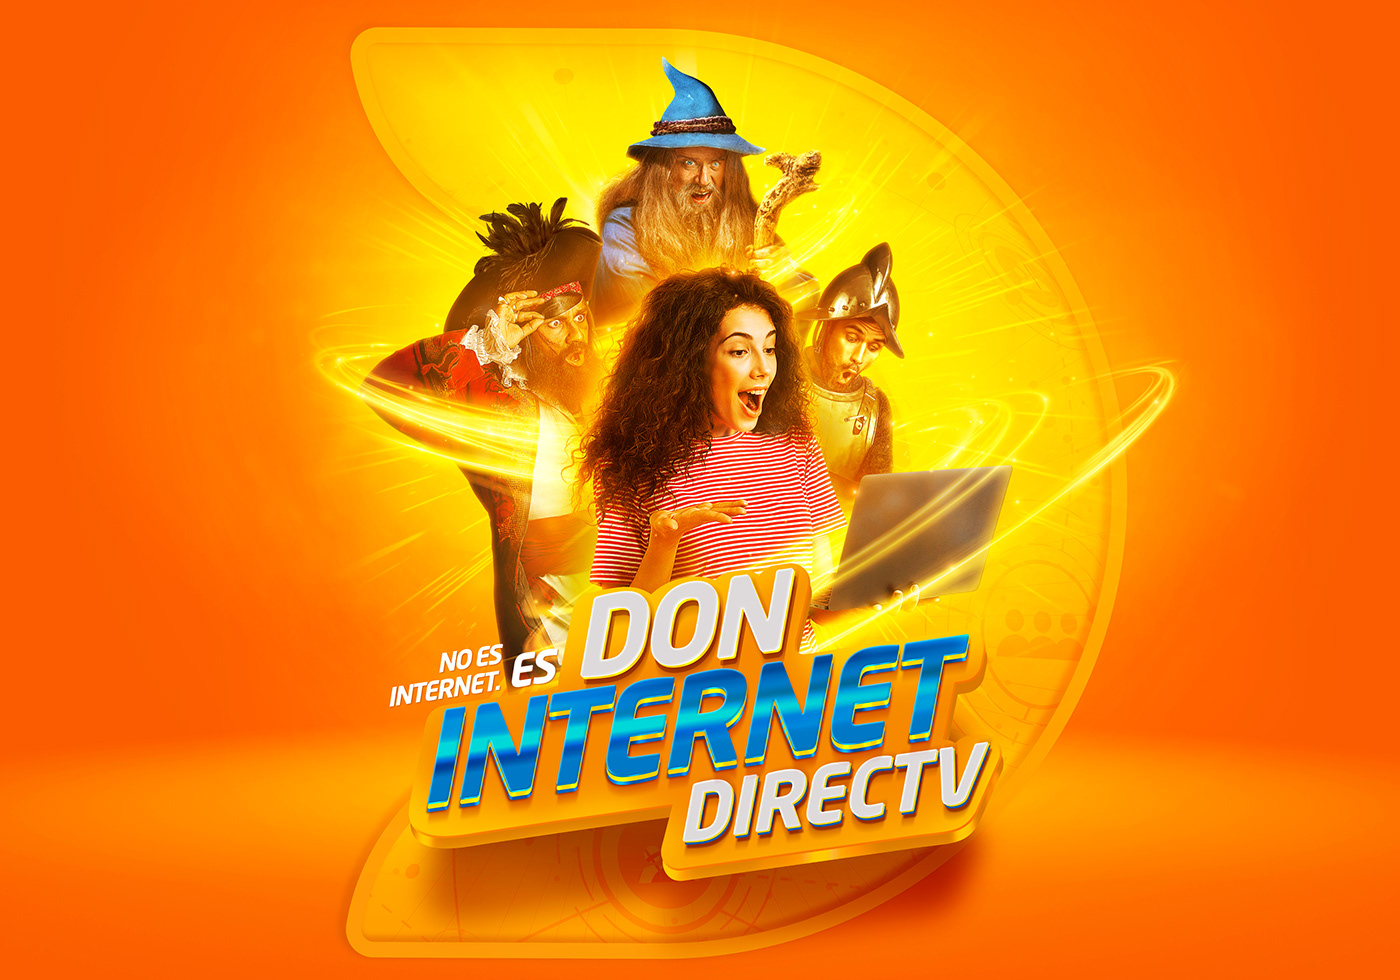 DirecTV Grey colombia Internet AT&T / DirecTV AT&T net ads print Advertising  retouch